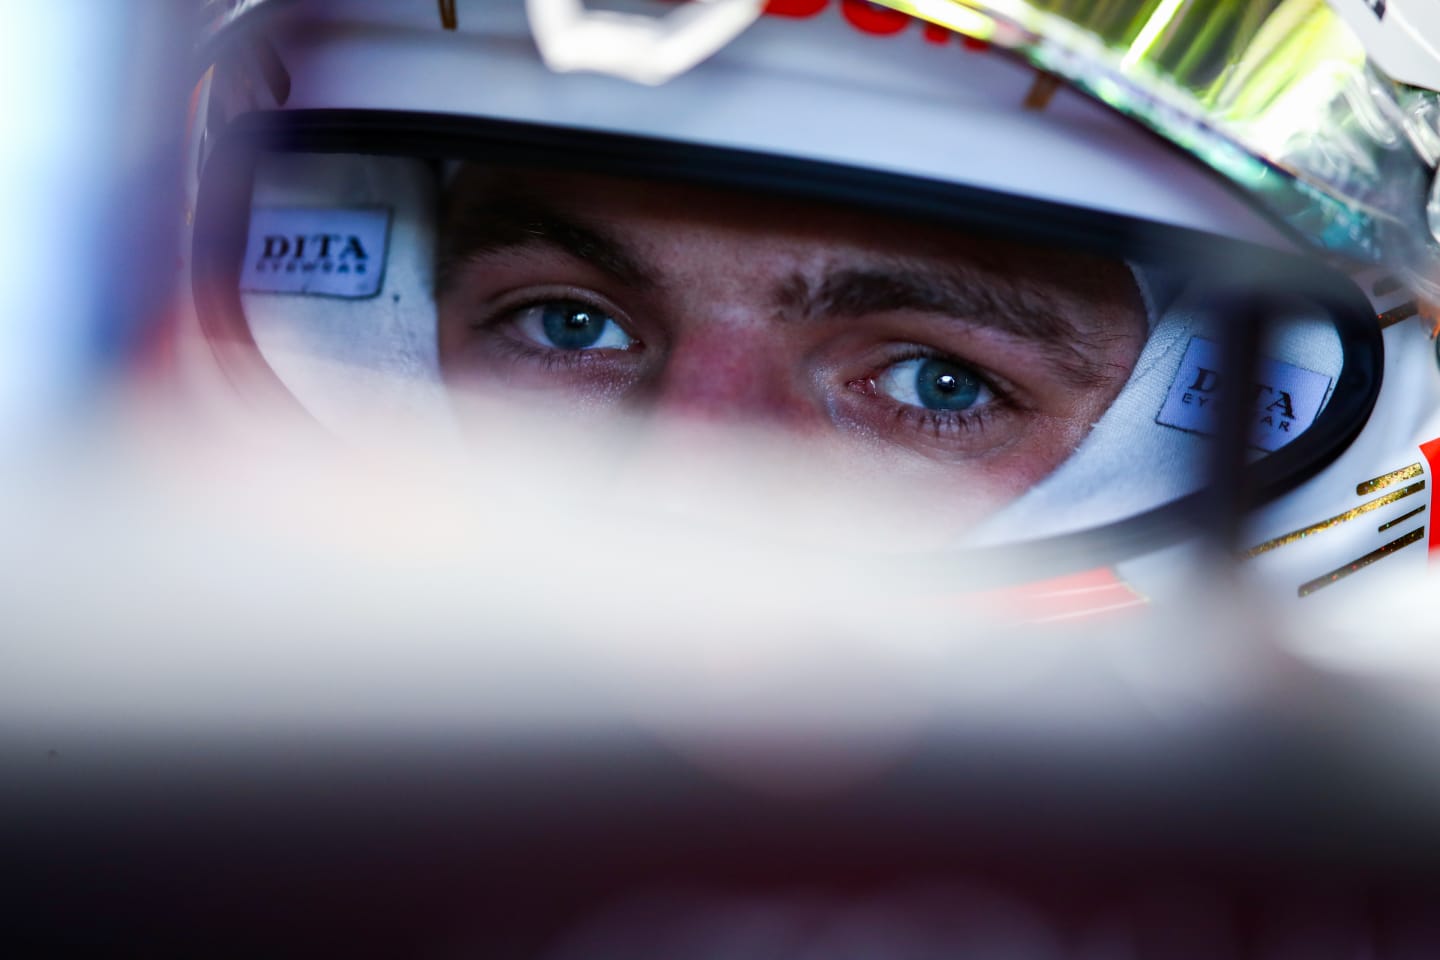 NUERBURG, GERMANY - OCTOBER 10: Max Verstappen of Netherlands and Red Bull Racing looks on in the garage during qualifying ahead of the F1 Eifel Grand Prix at Nuerburgring on October 10, 2020 in Nuerburg, Germany. (Photo by Mark Thompson/Getty Images)